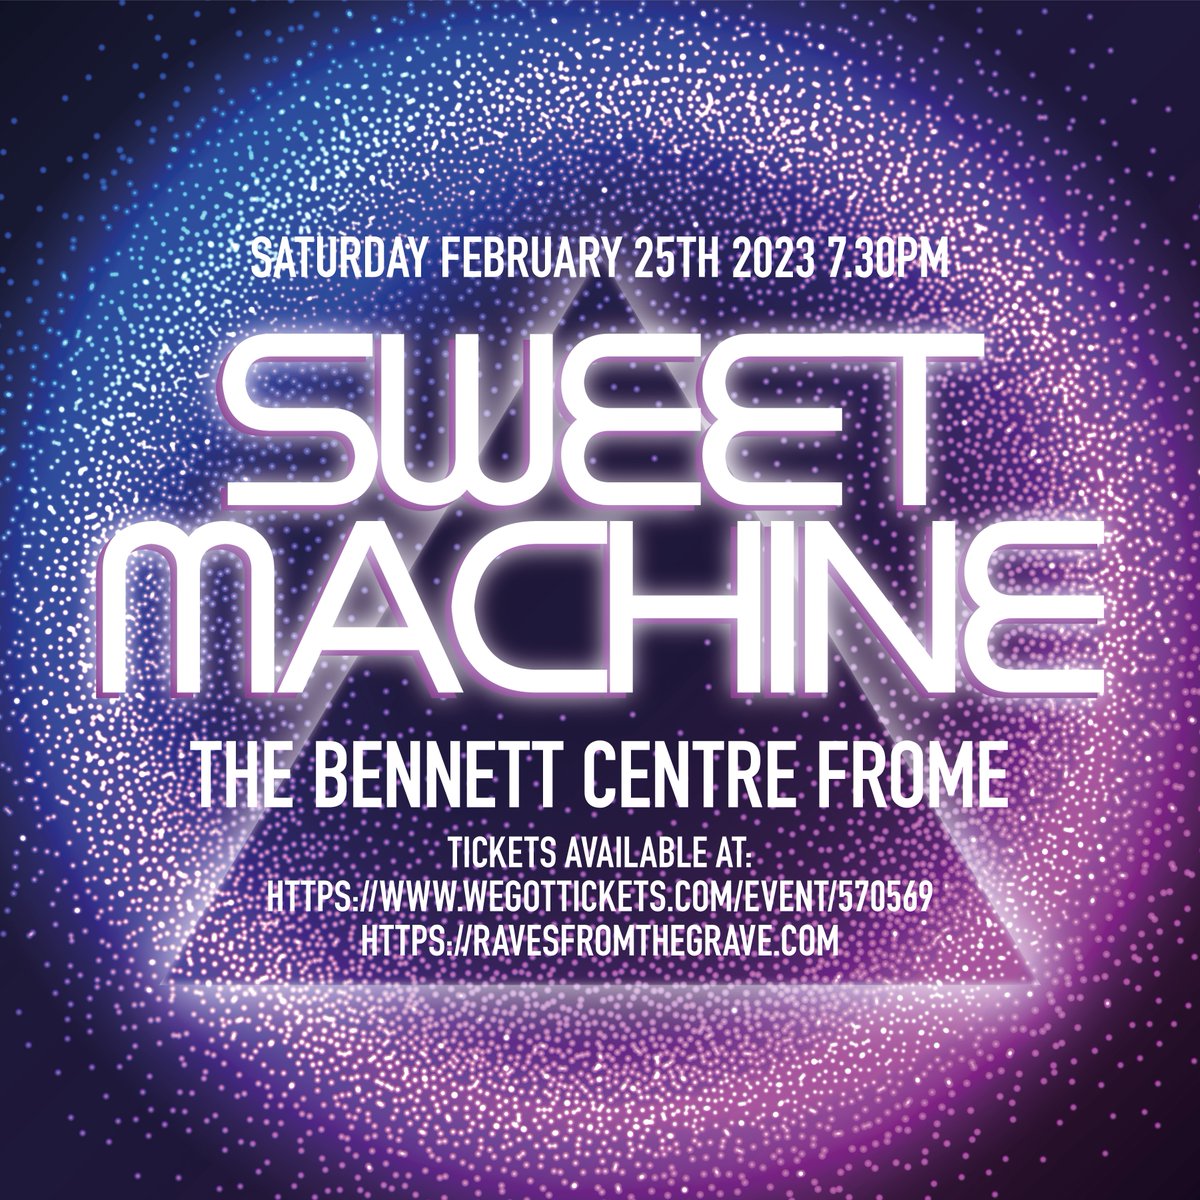 THE BENNETT CENTRE FROME 25/2/23 TICKETS Available at: wegottickets.com/event/570569 or via ravesfromthegrave.com Join us for an evening of live, original #synthpop, songs old, new and to be tried! #Frome. Bar, dancing and party vibes!#synthwave #80s #90s #electropop